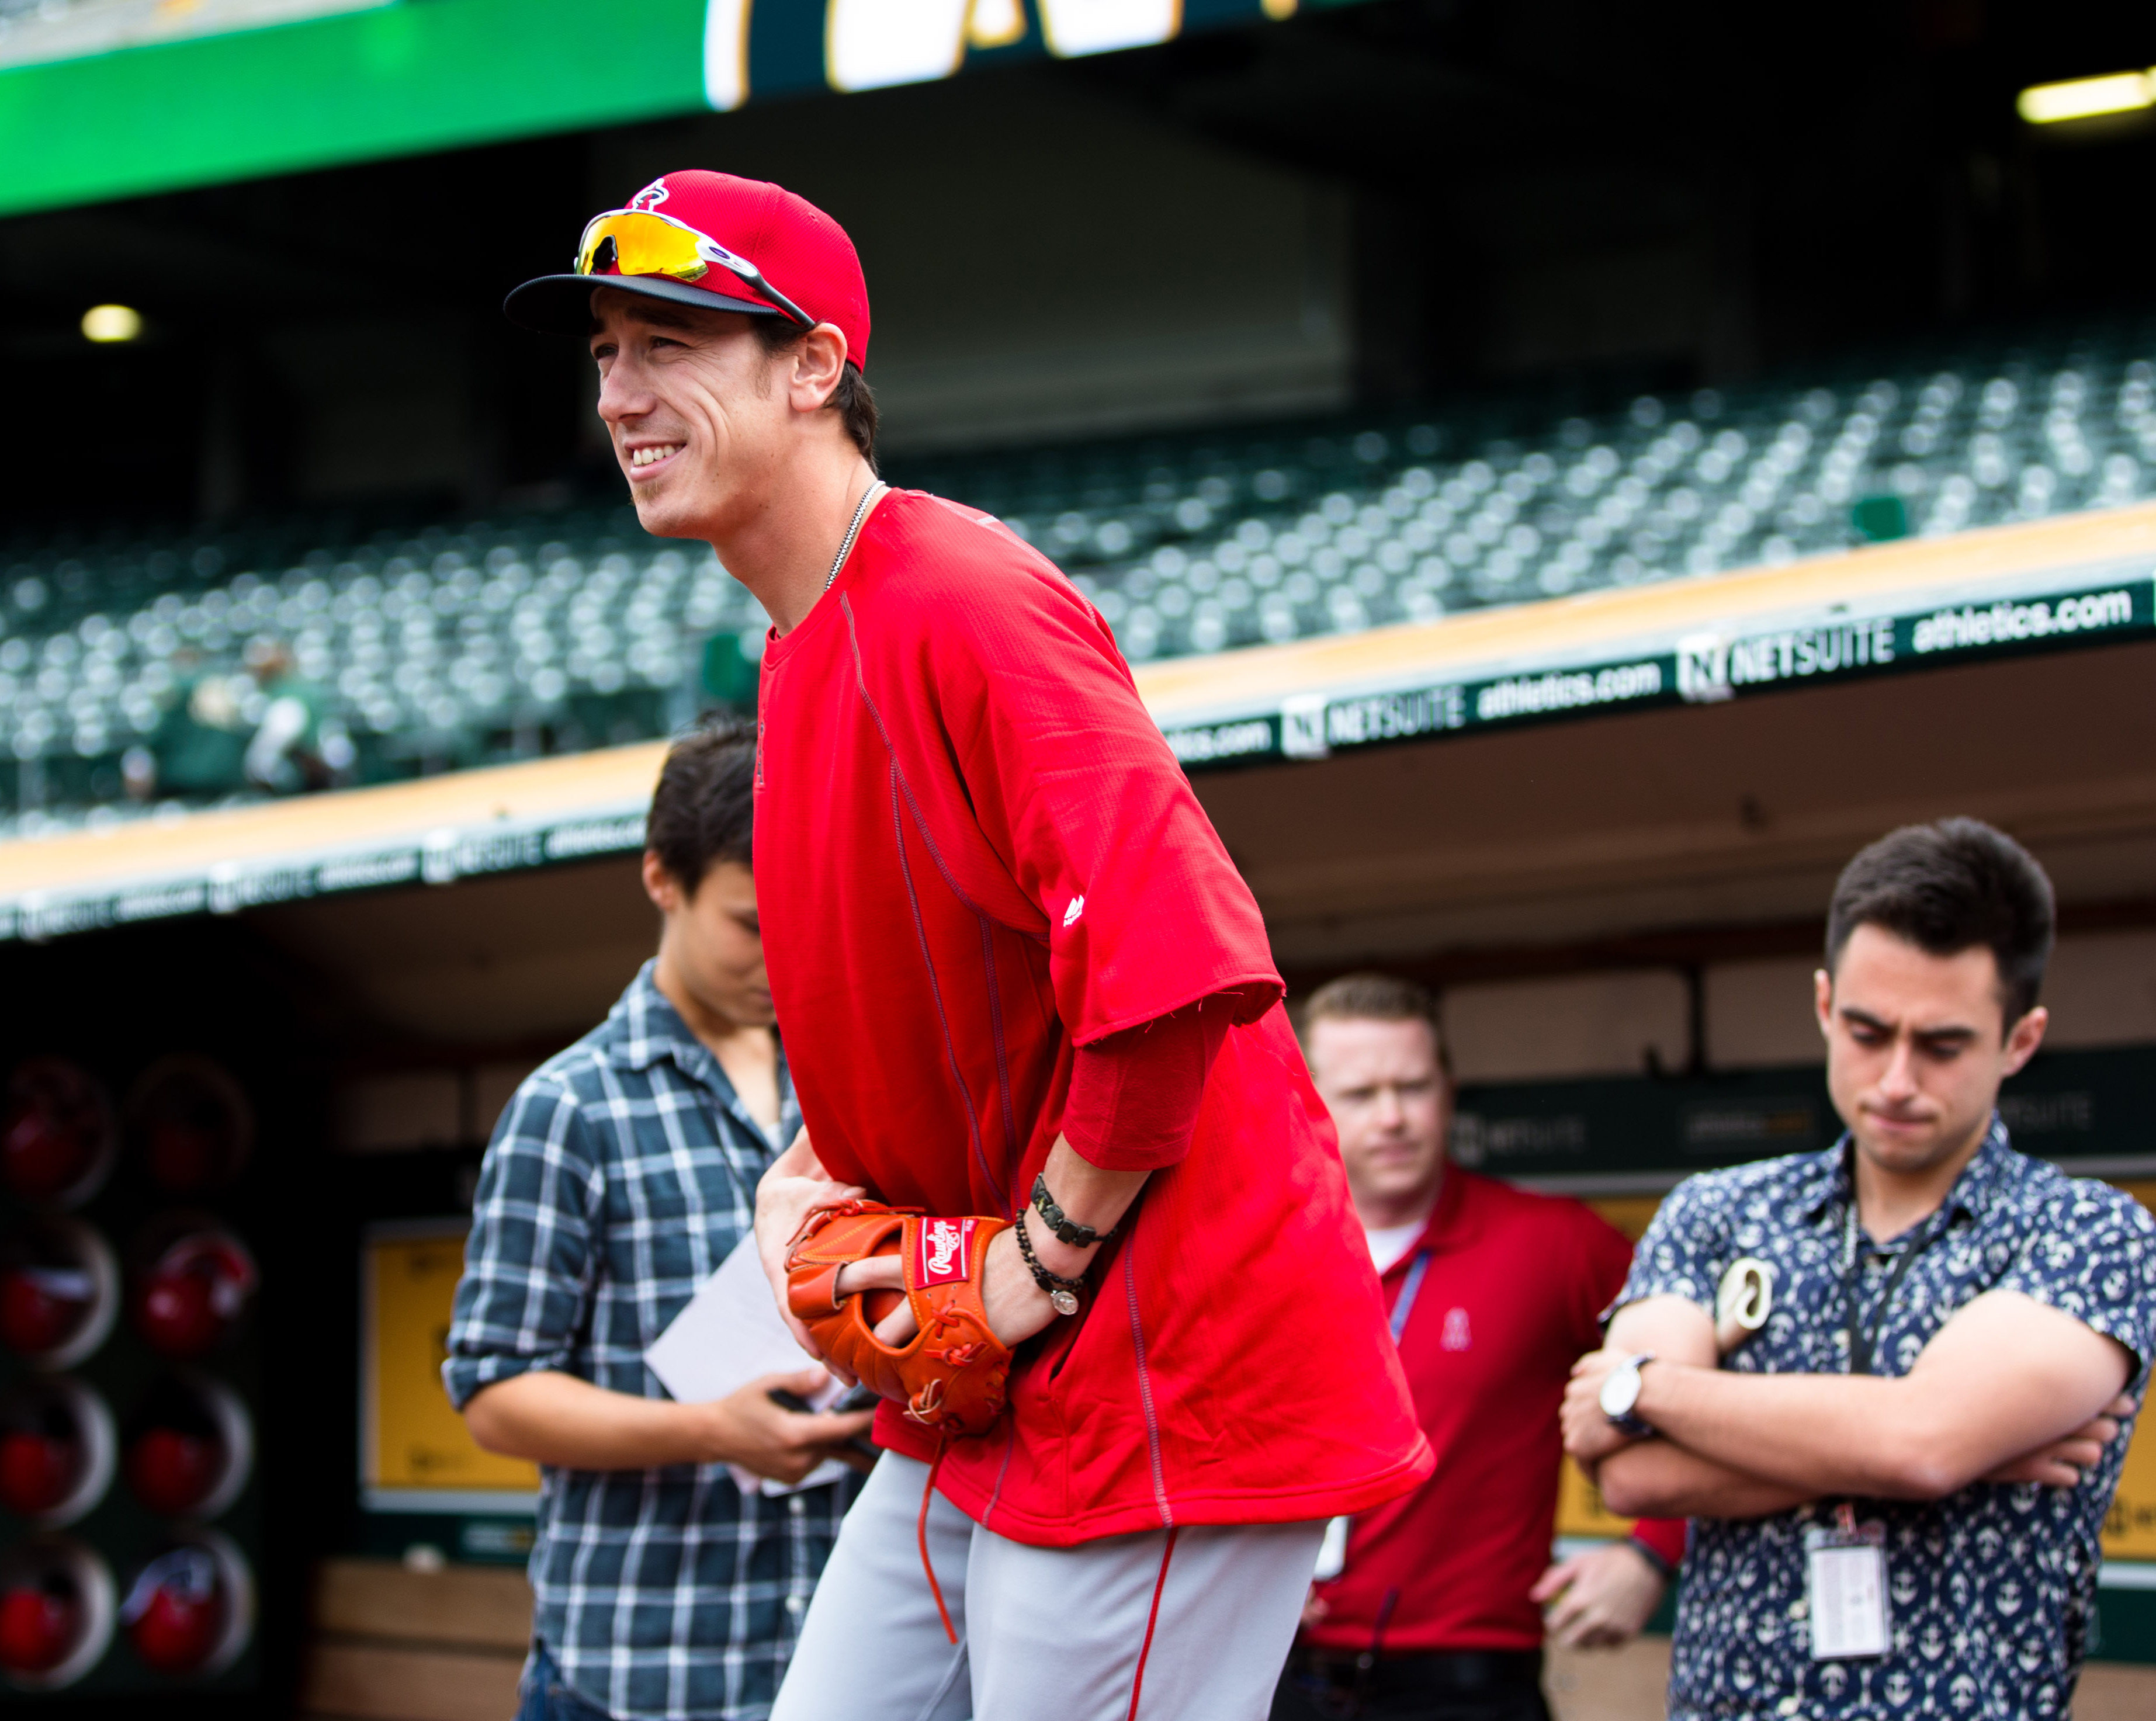 Tim Lincecum embraces a second chance with new Angels team